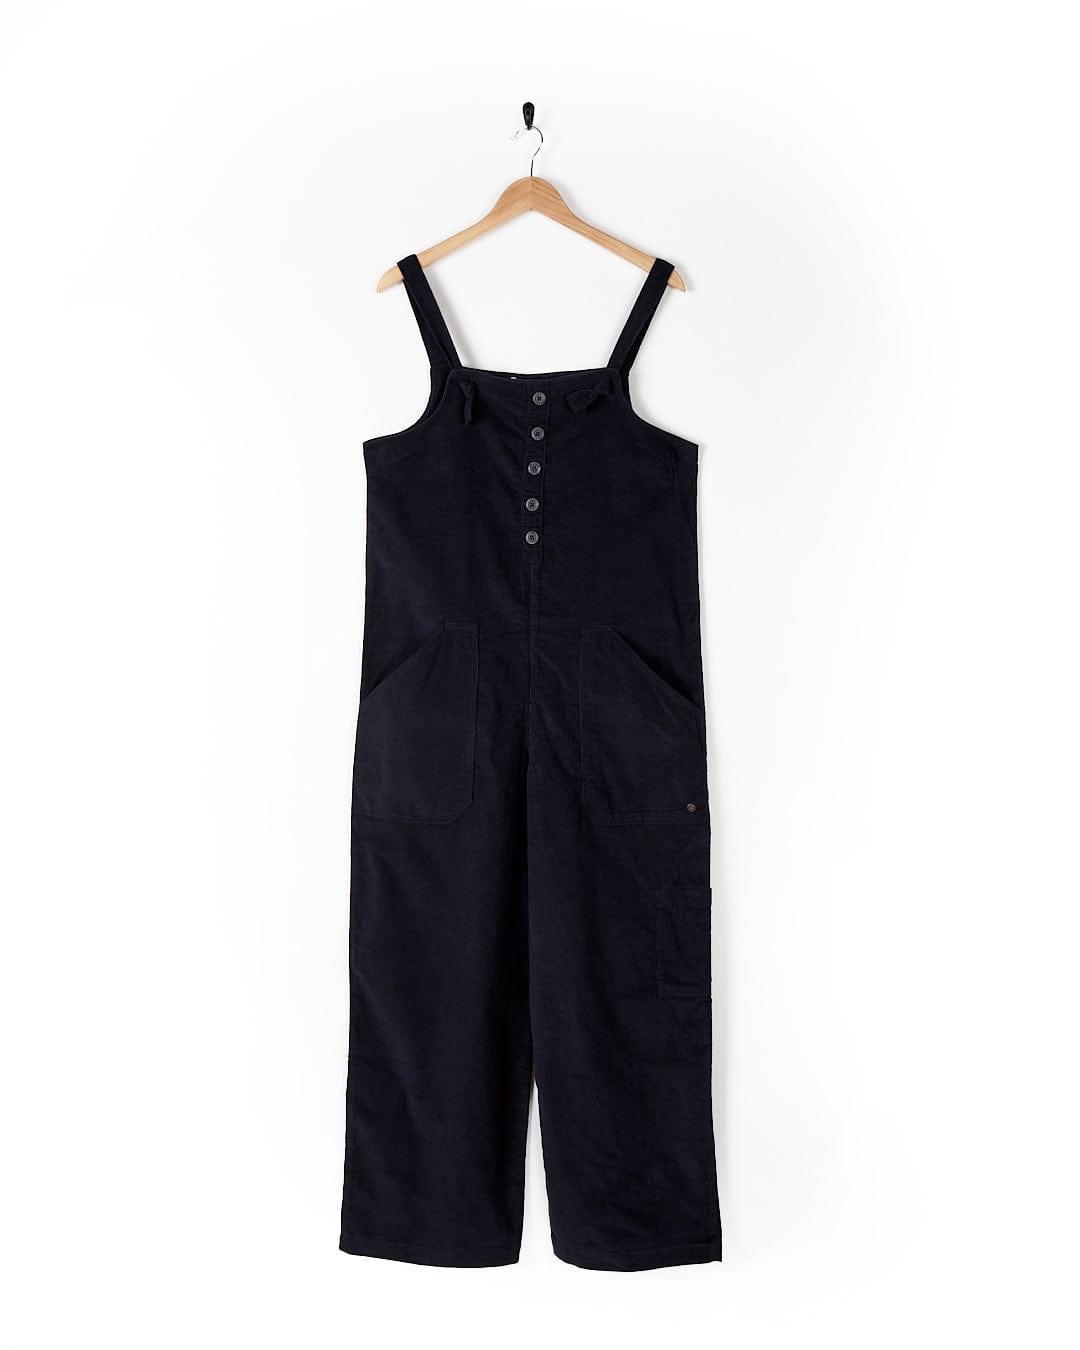 A Saltrock Nancy - Womens Cord Jumpsuit - Dark Blue is hanging on a wooden hanger against a white background. Fashion-conscious women will appreciate the wide legs, button details on the chest, and two large front pockets, blending both style and practicality effortlessly.